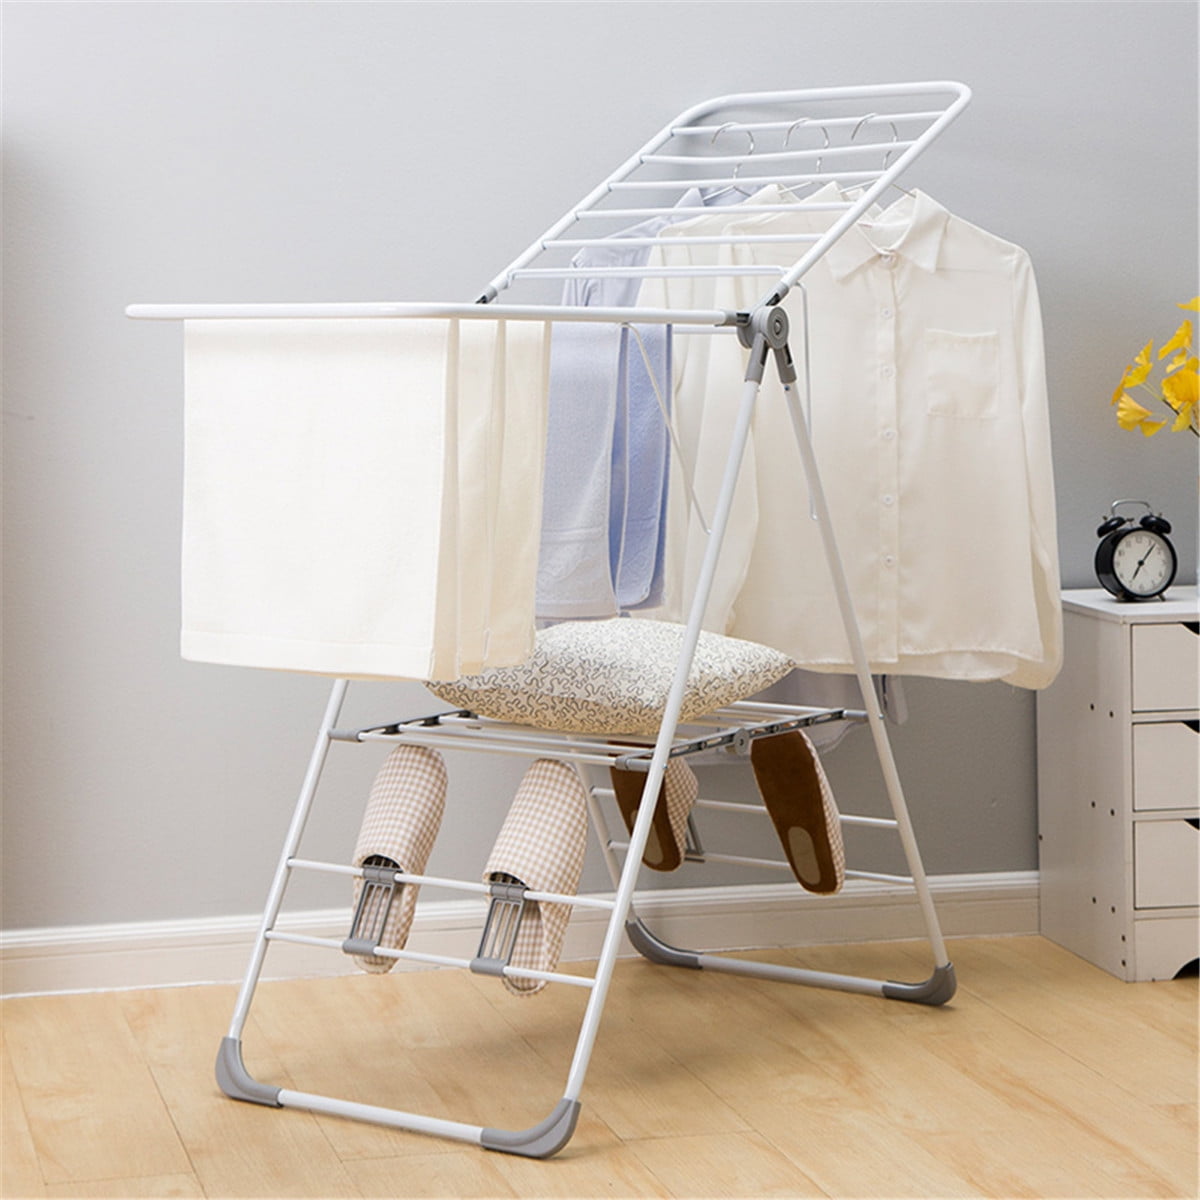 Portable Gullwing Laundry Drying Rack Heavy Duty Folding Clothes Storage Drying Rack Dryer